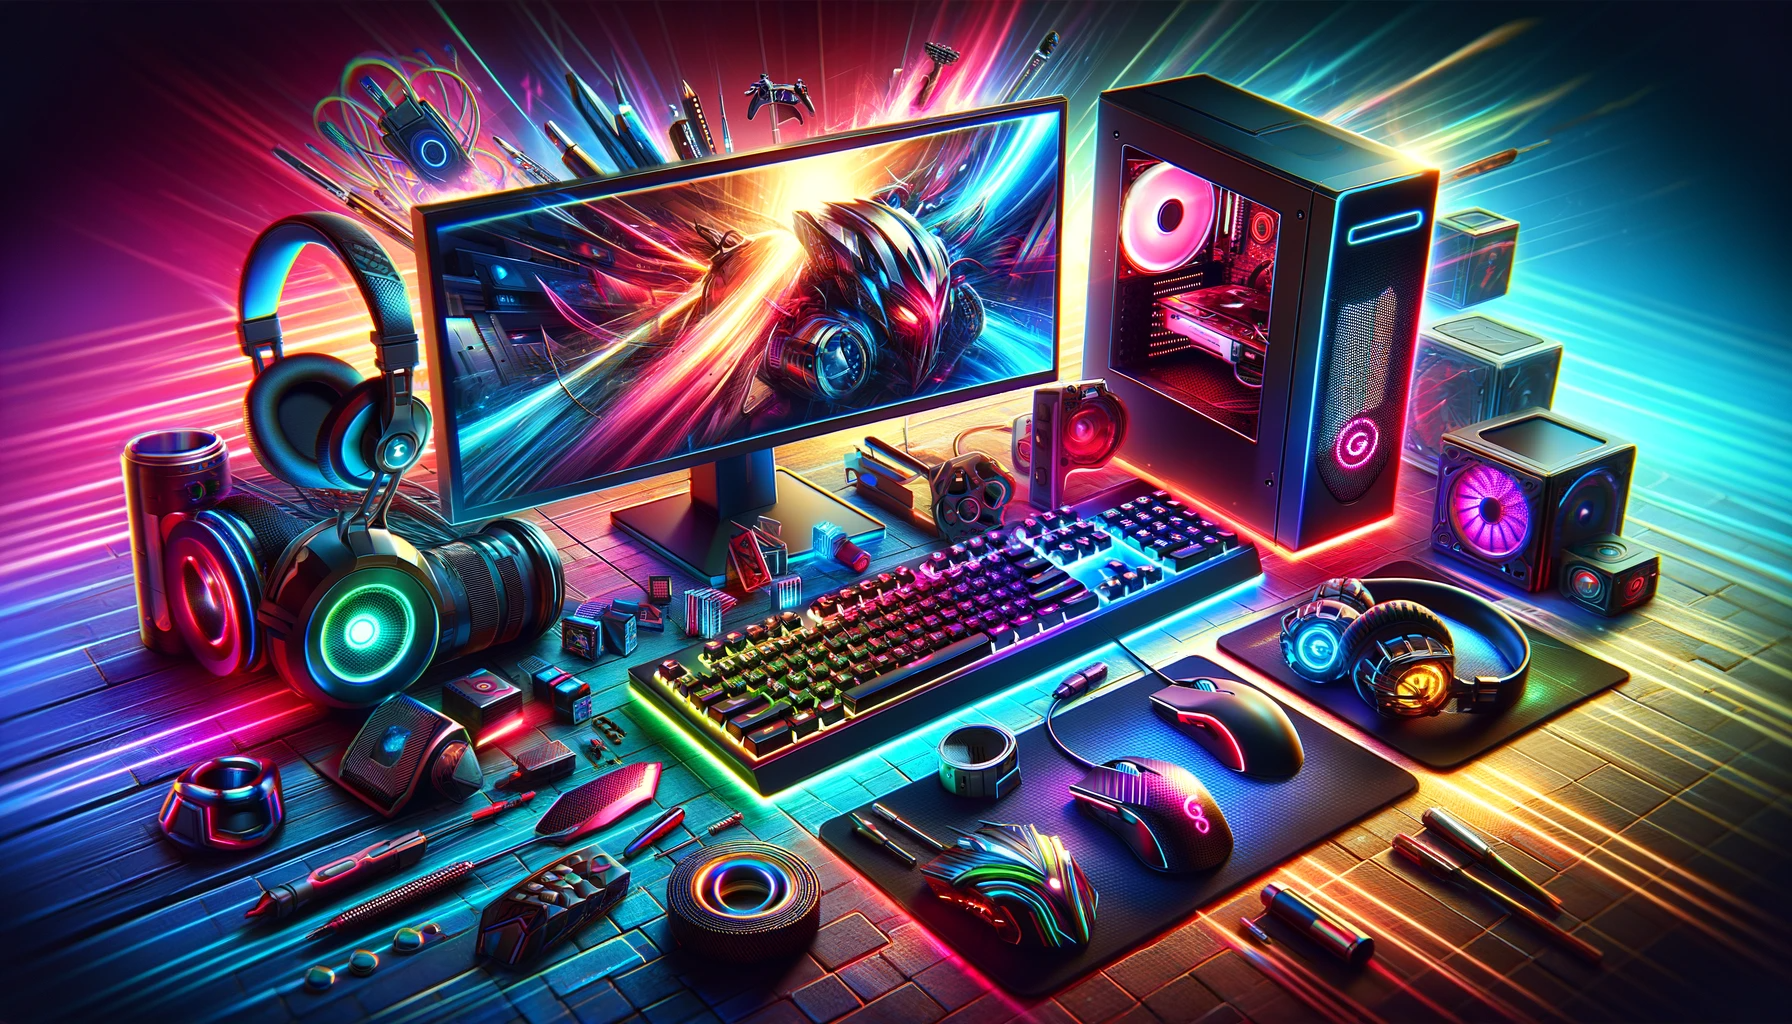 DALL·E 2024-01-25 15-57-43 - A visually stunning banner for a gaming website, featuring elements like gaming computers, RGB lighting, and gaming accessories- The image should be v